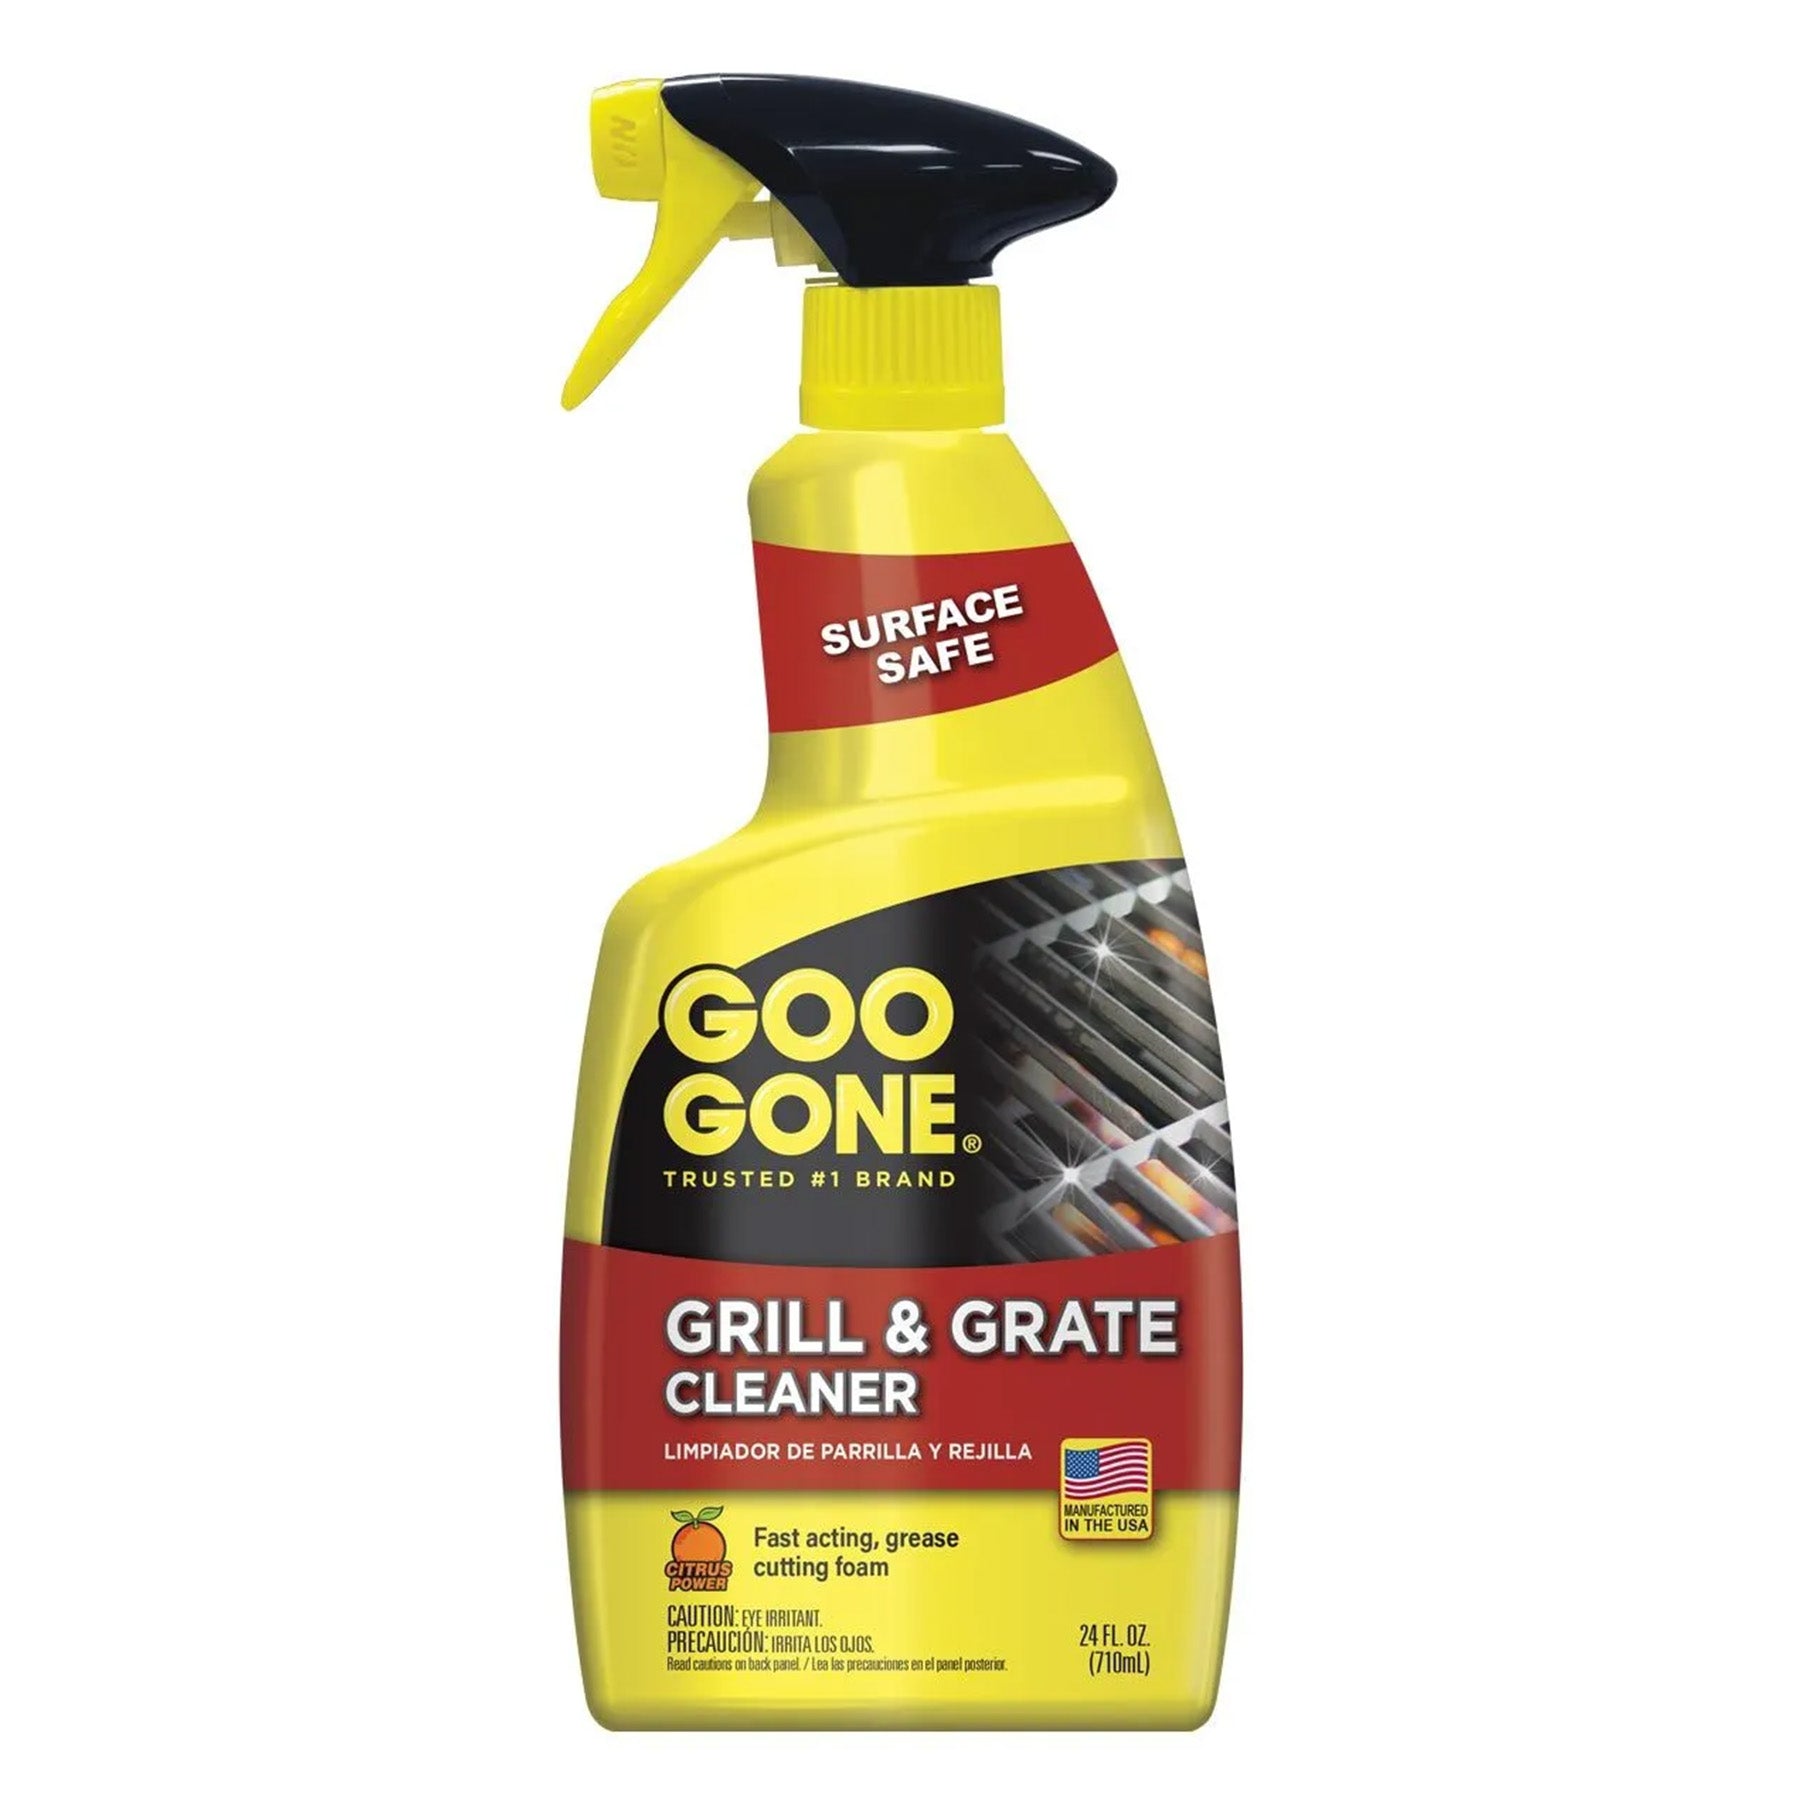 Grill cleaner